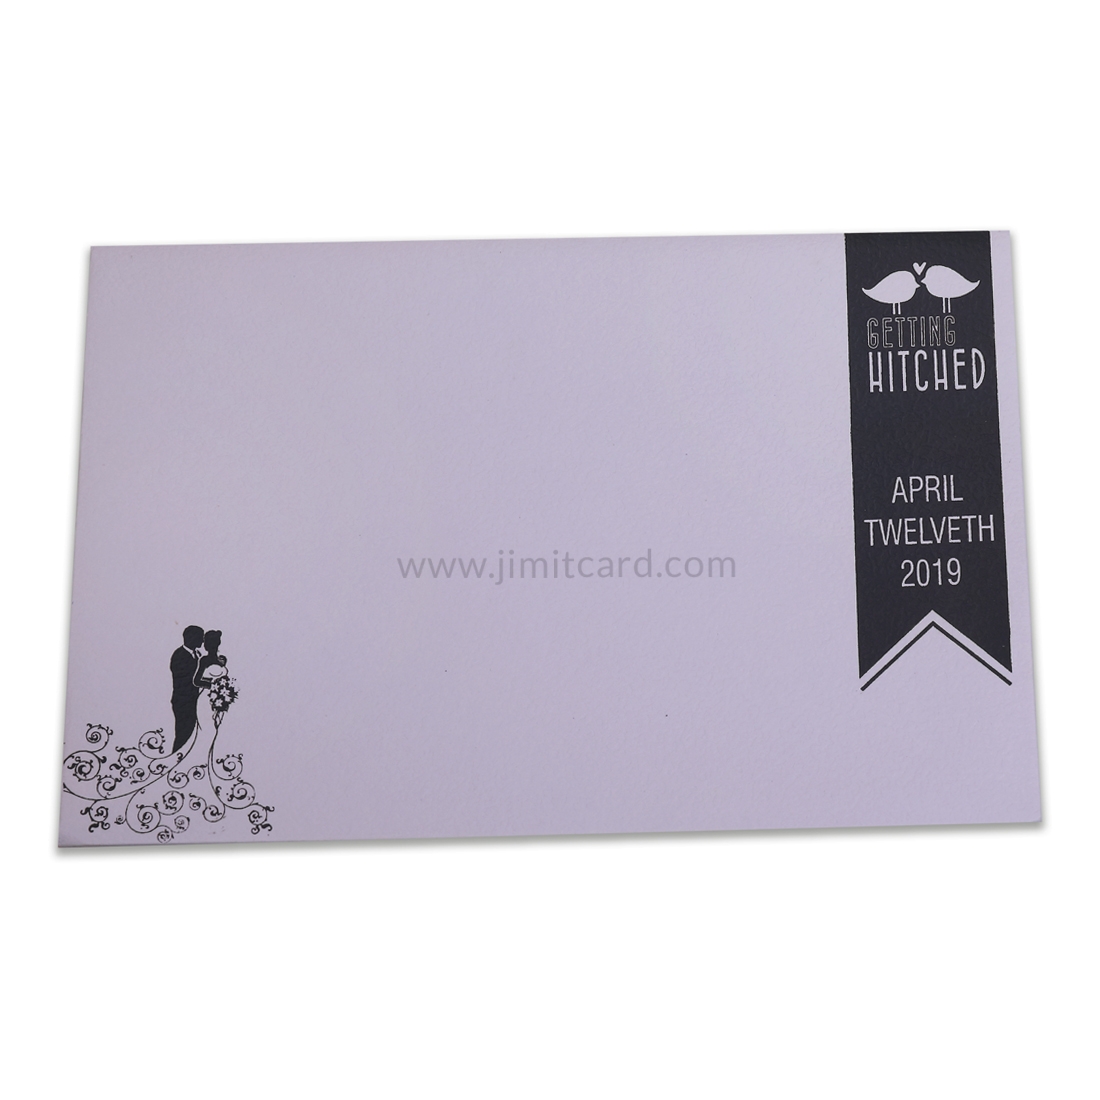 Ivory Color Wedding Invitation with floral Embedded Design and Bride and Groom-12669